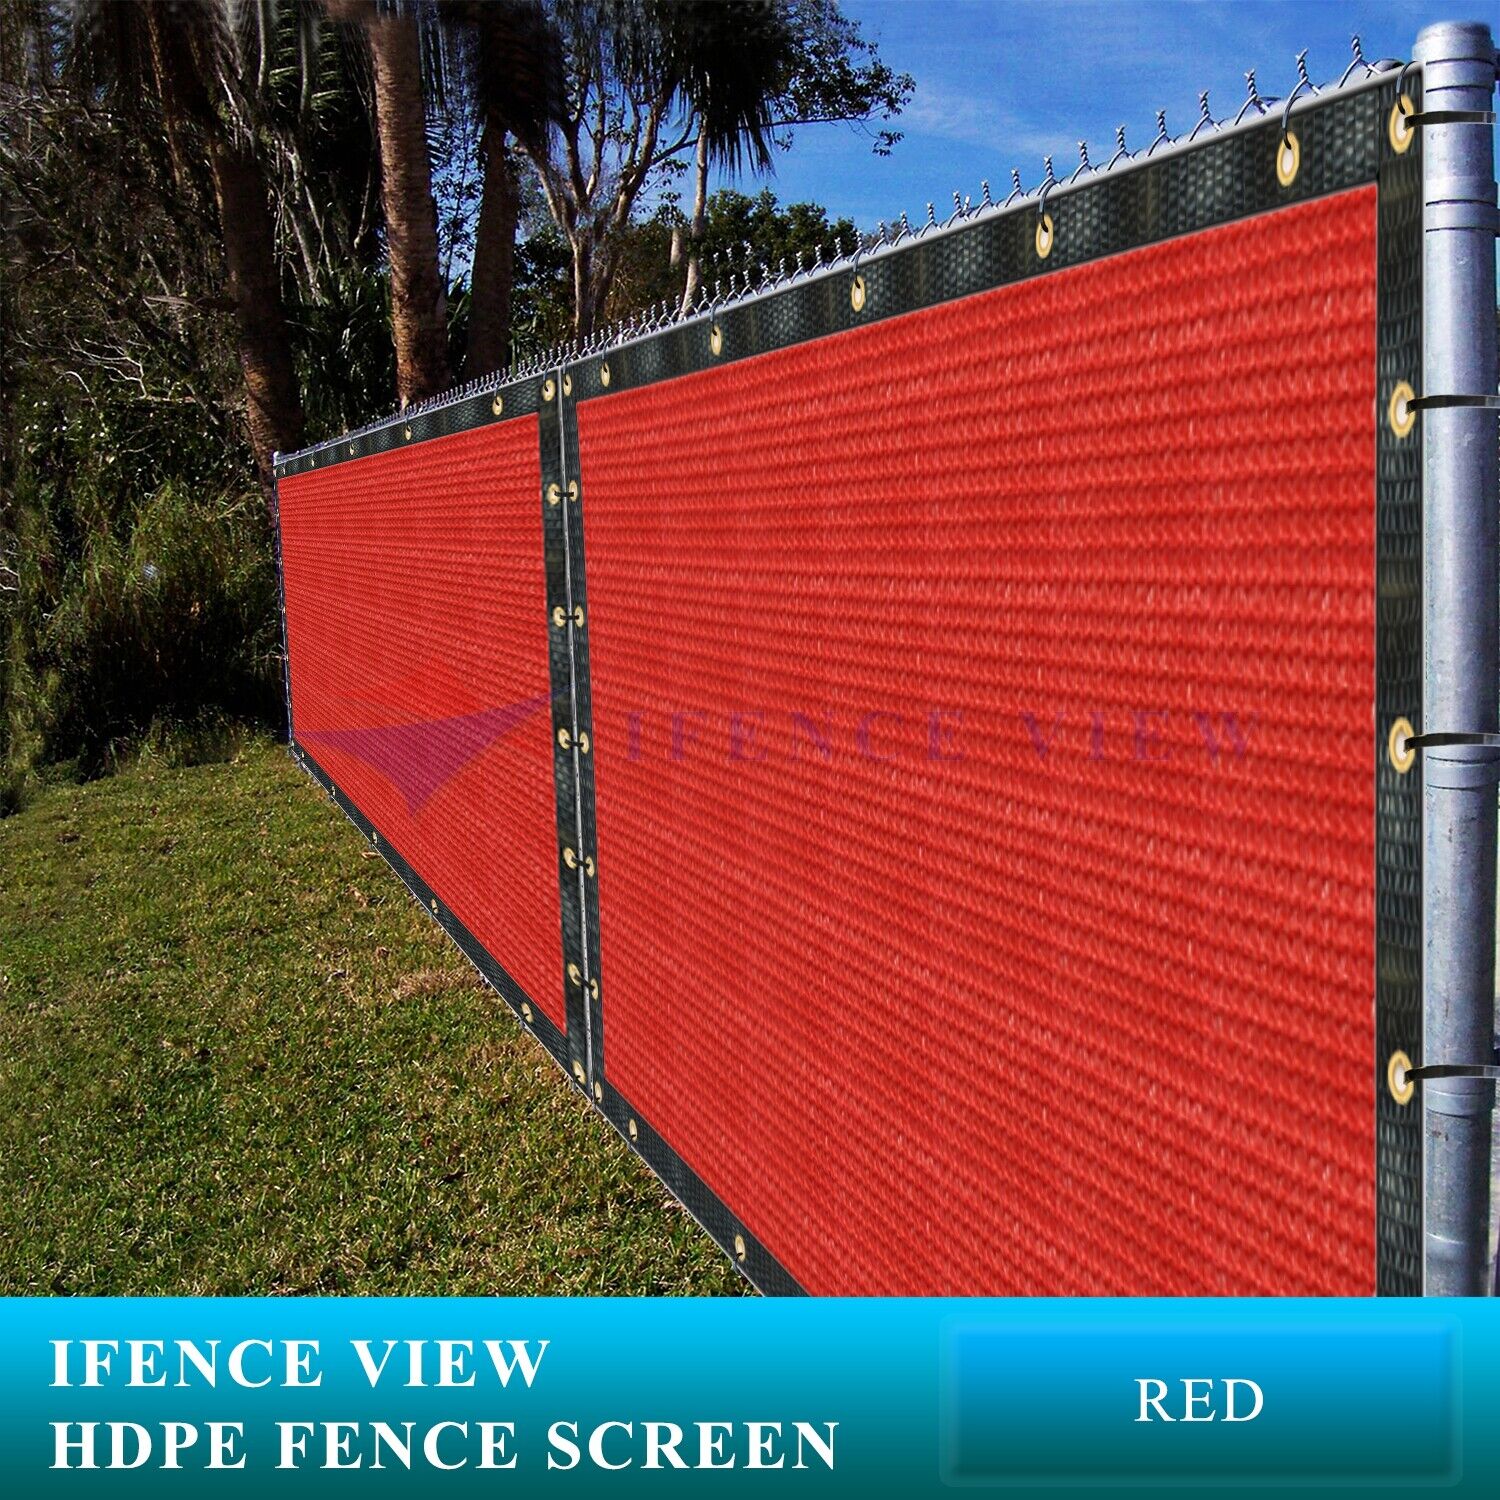 Ifenceview 7'x3'-7'x100' FT Red Fence Branded goods Privacy half Mesh Net Screen Ga